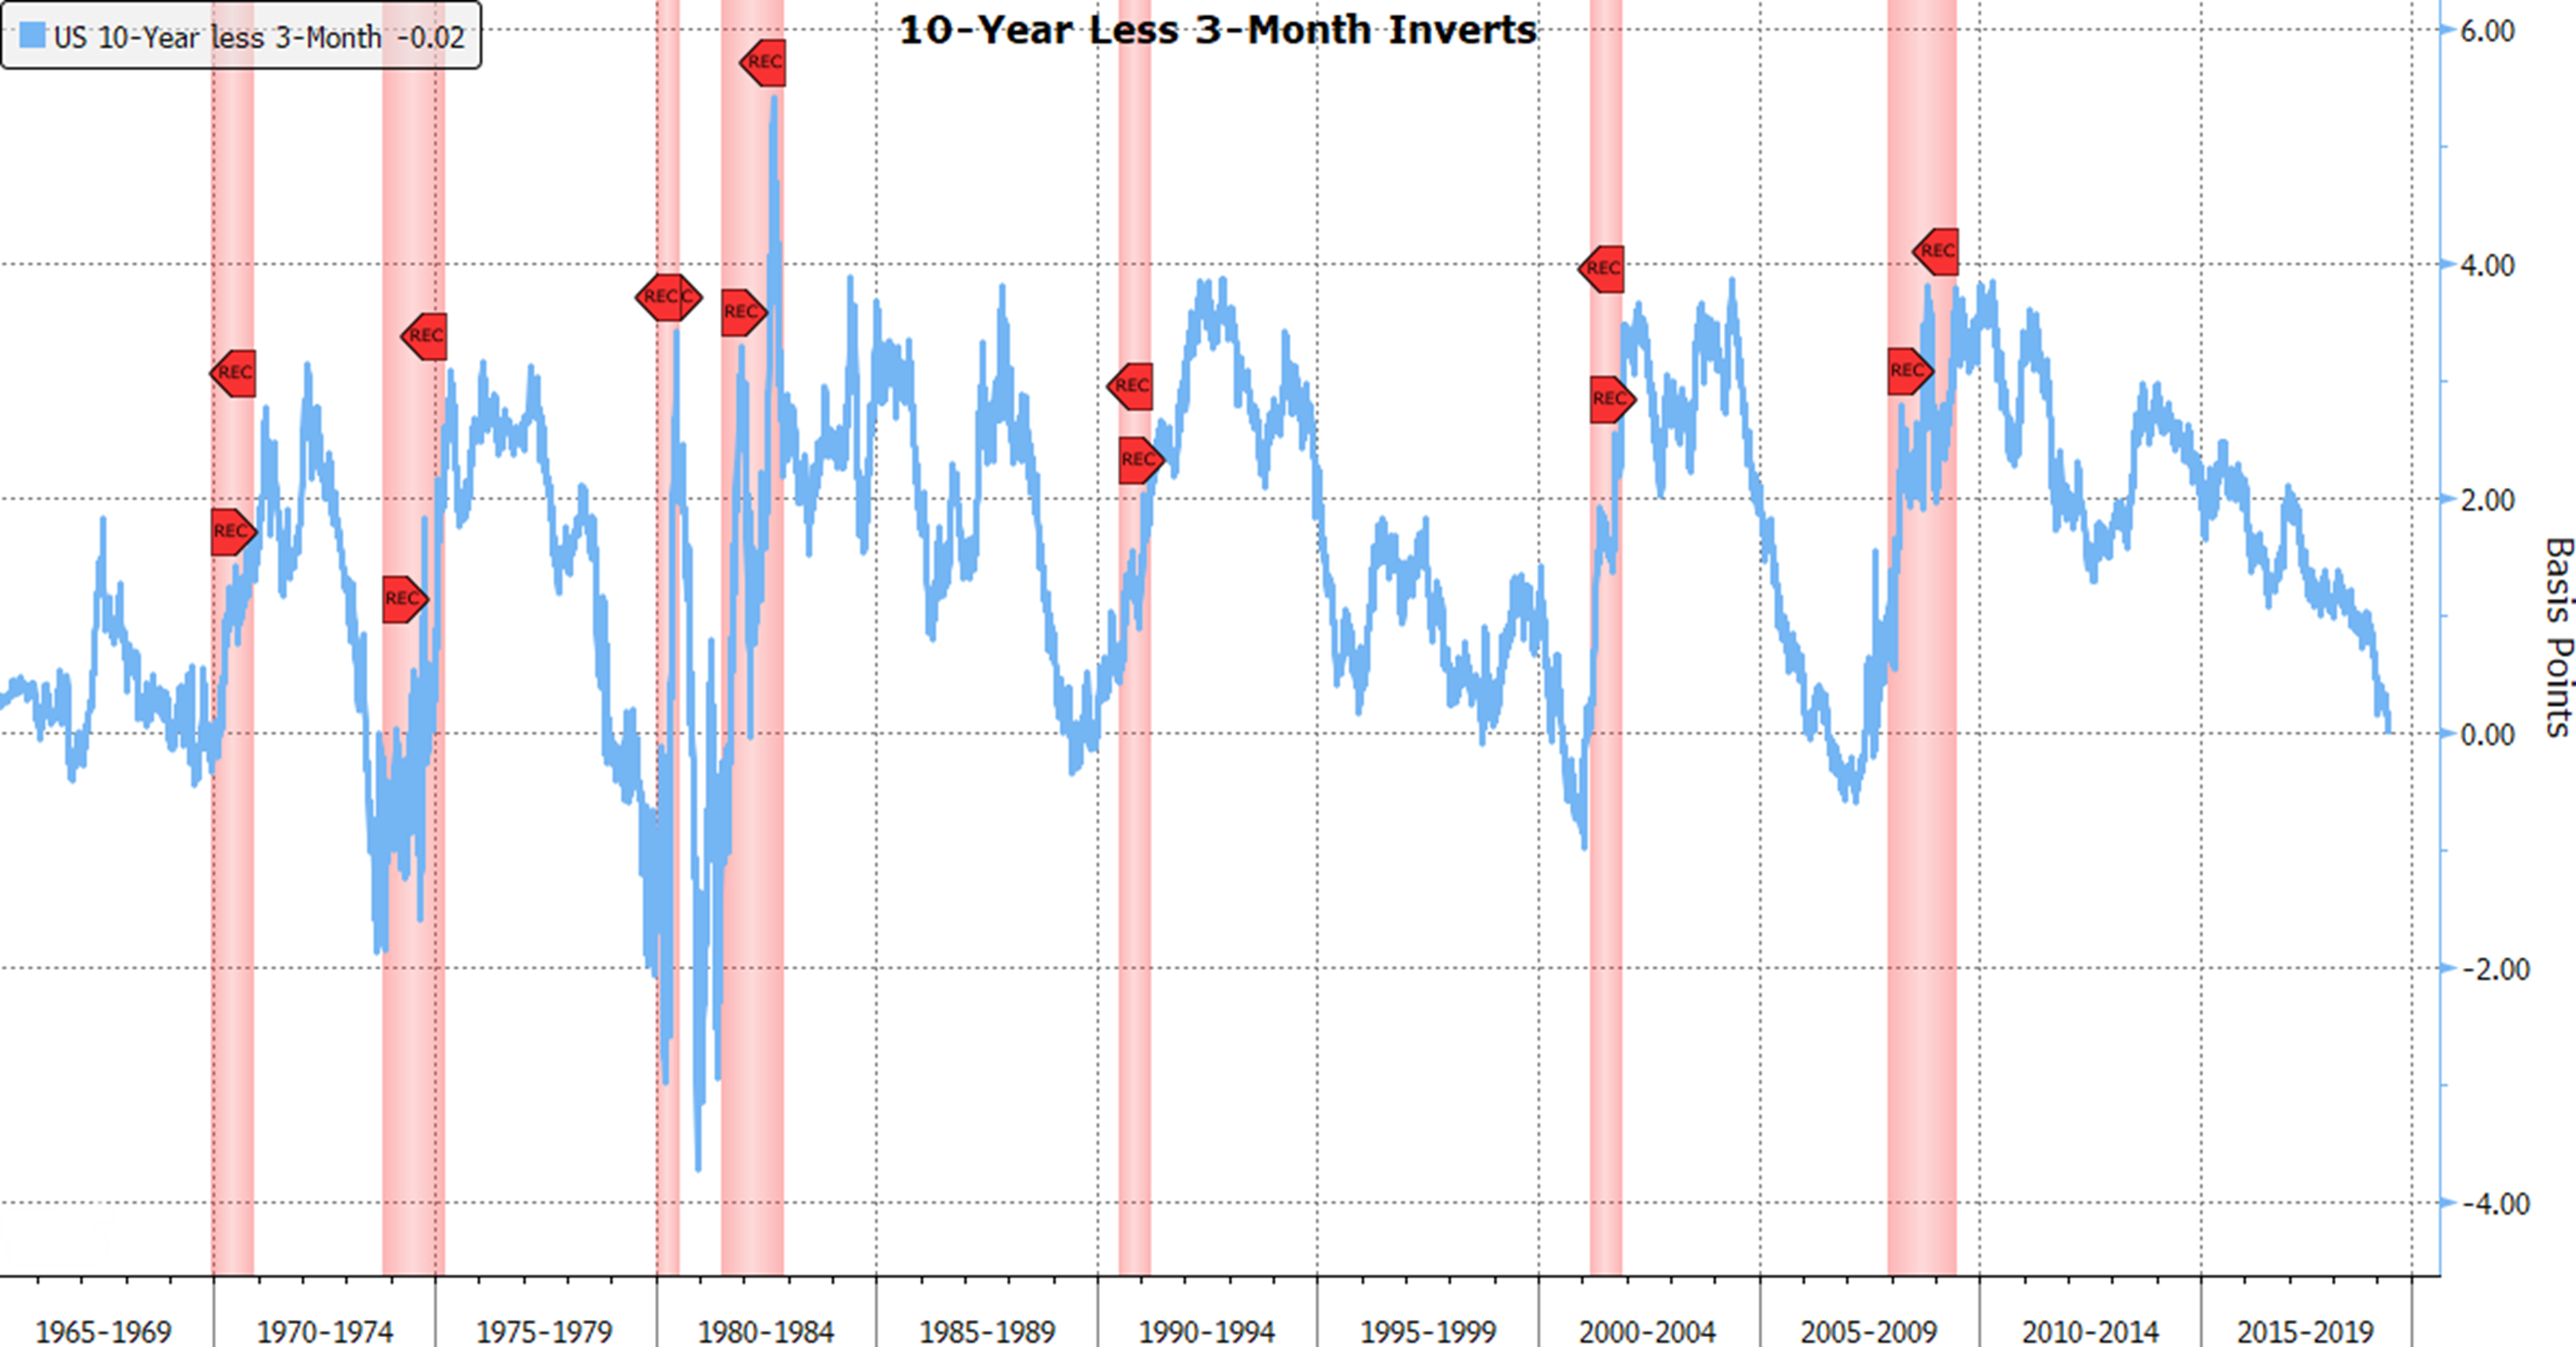 Yield Curve Inverts Though Recession Not Yet In Sight The Real Economy Blog